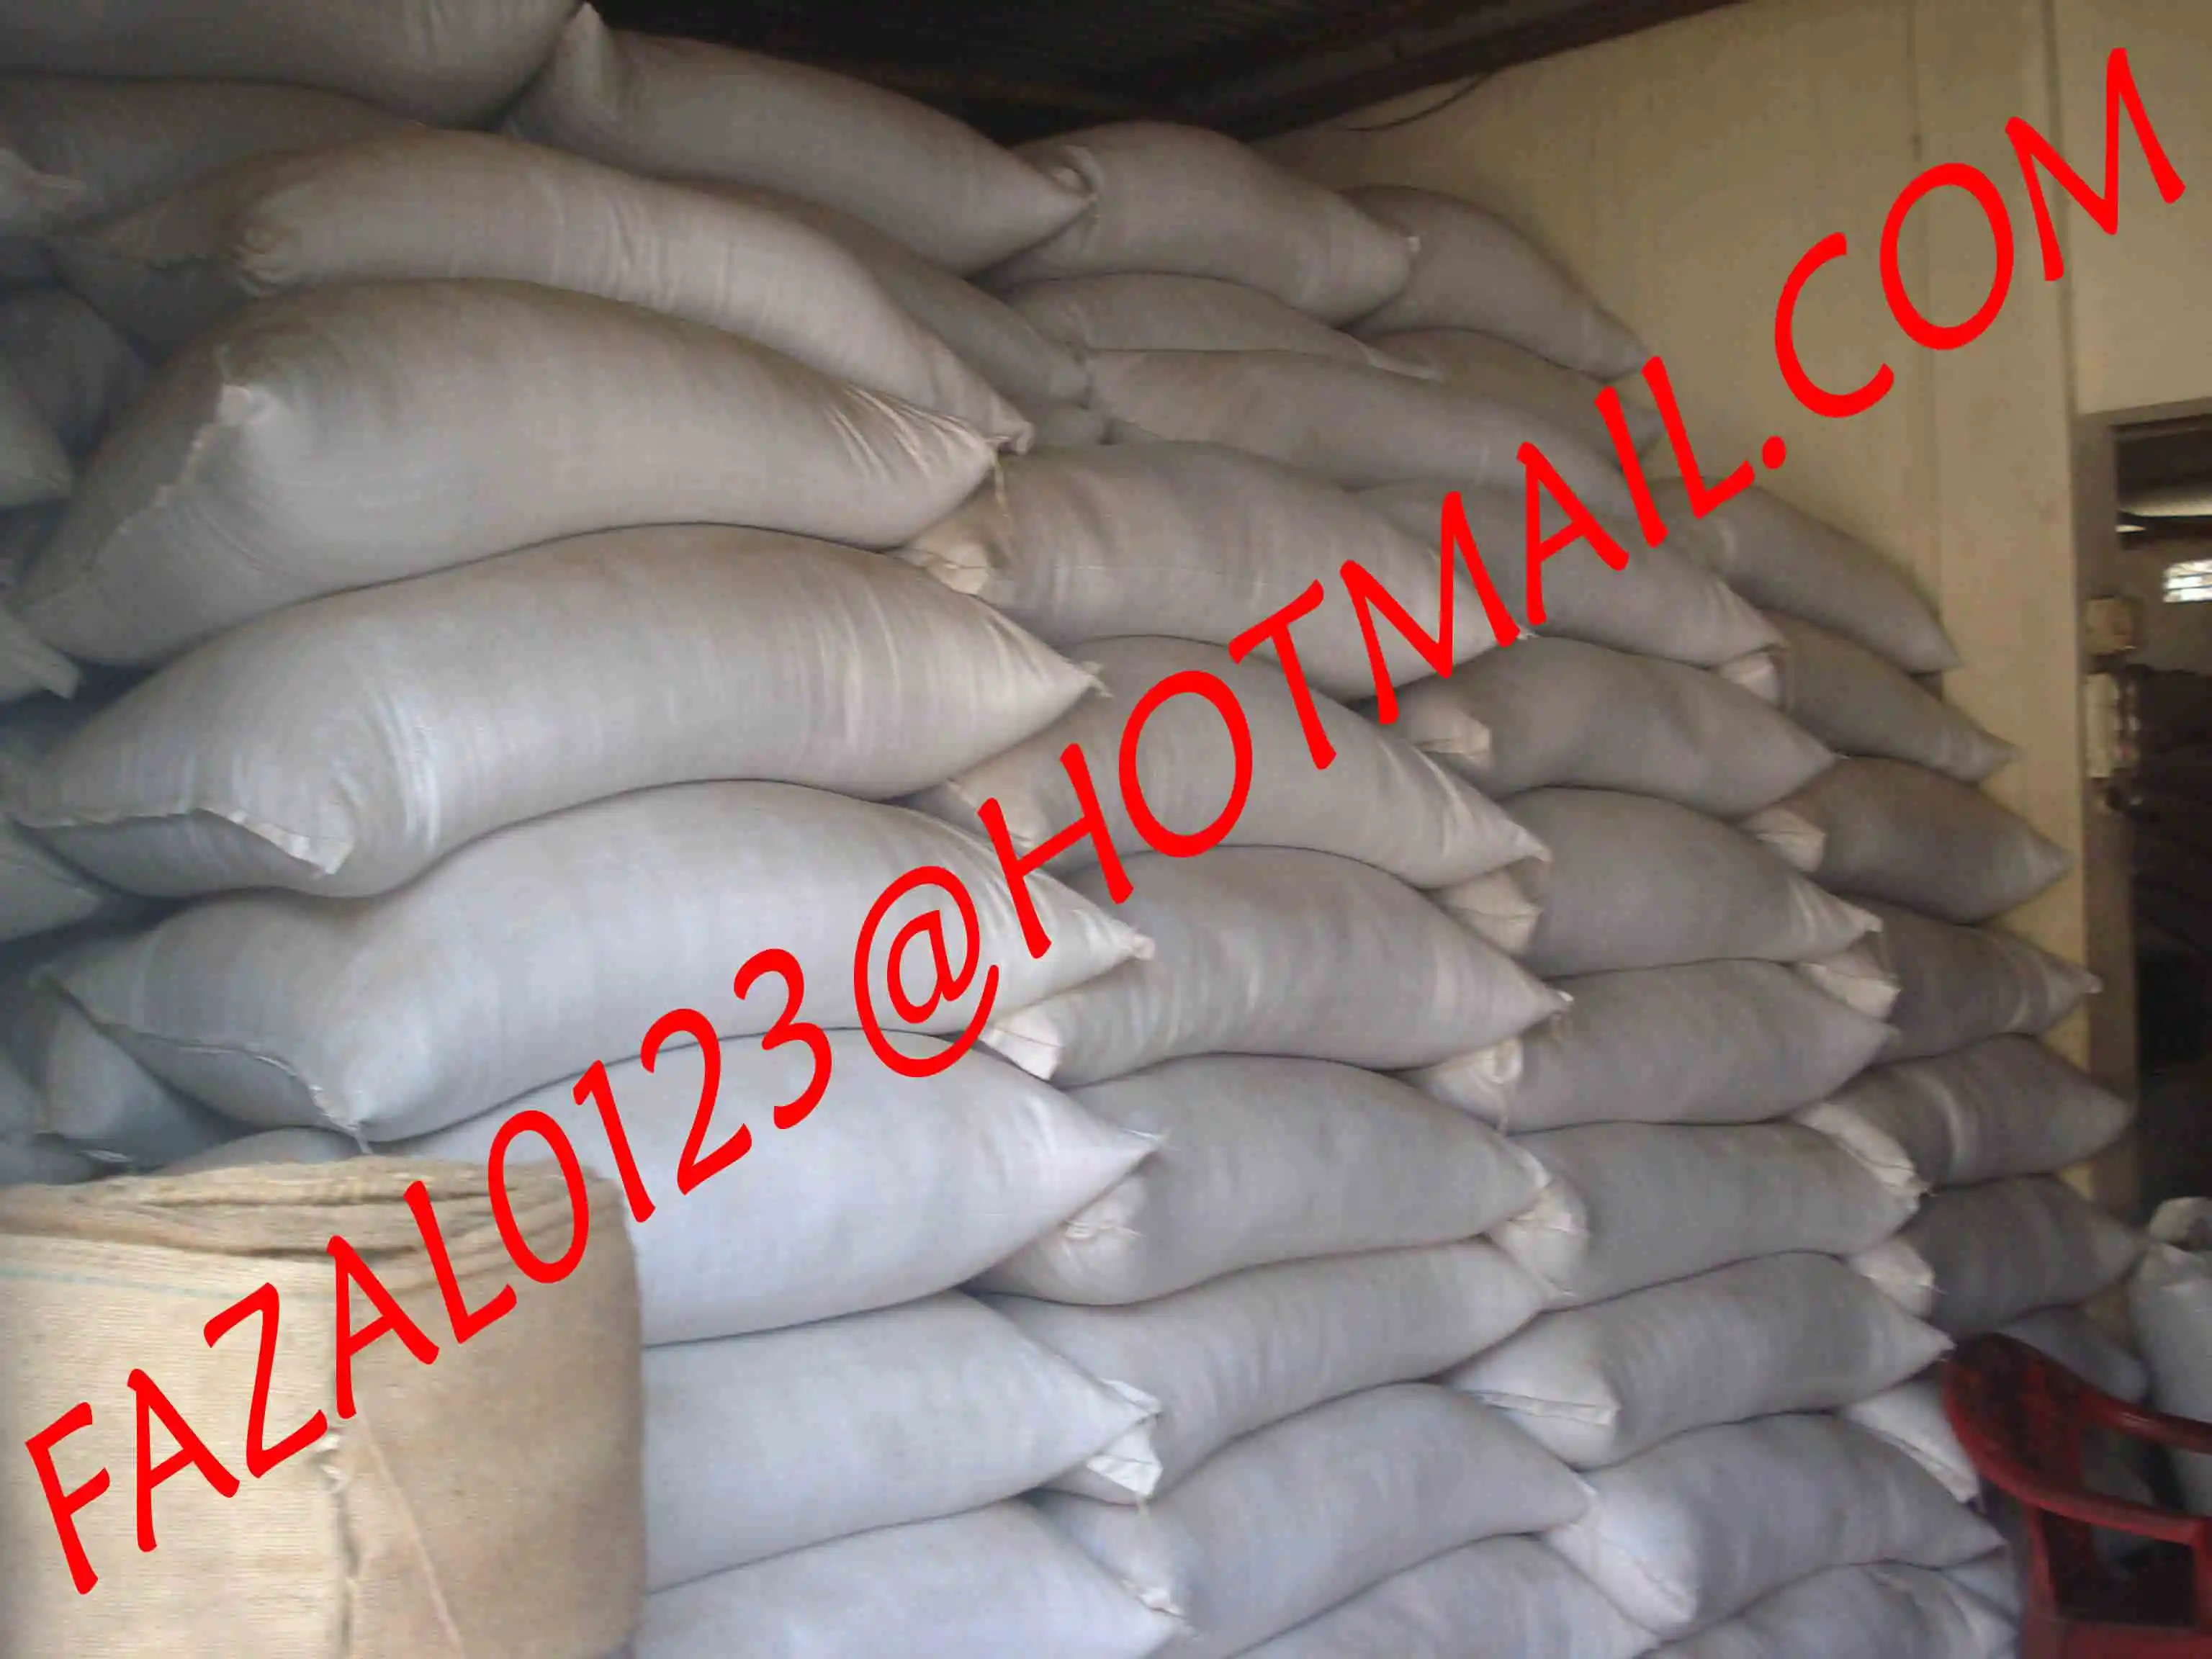 SESAME SEEDS BLACK RED BROWN WHITE FROM EXPORT TRADE ASSOCIATE